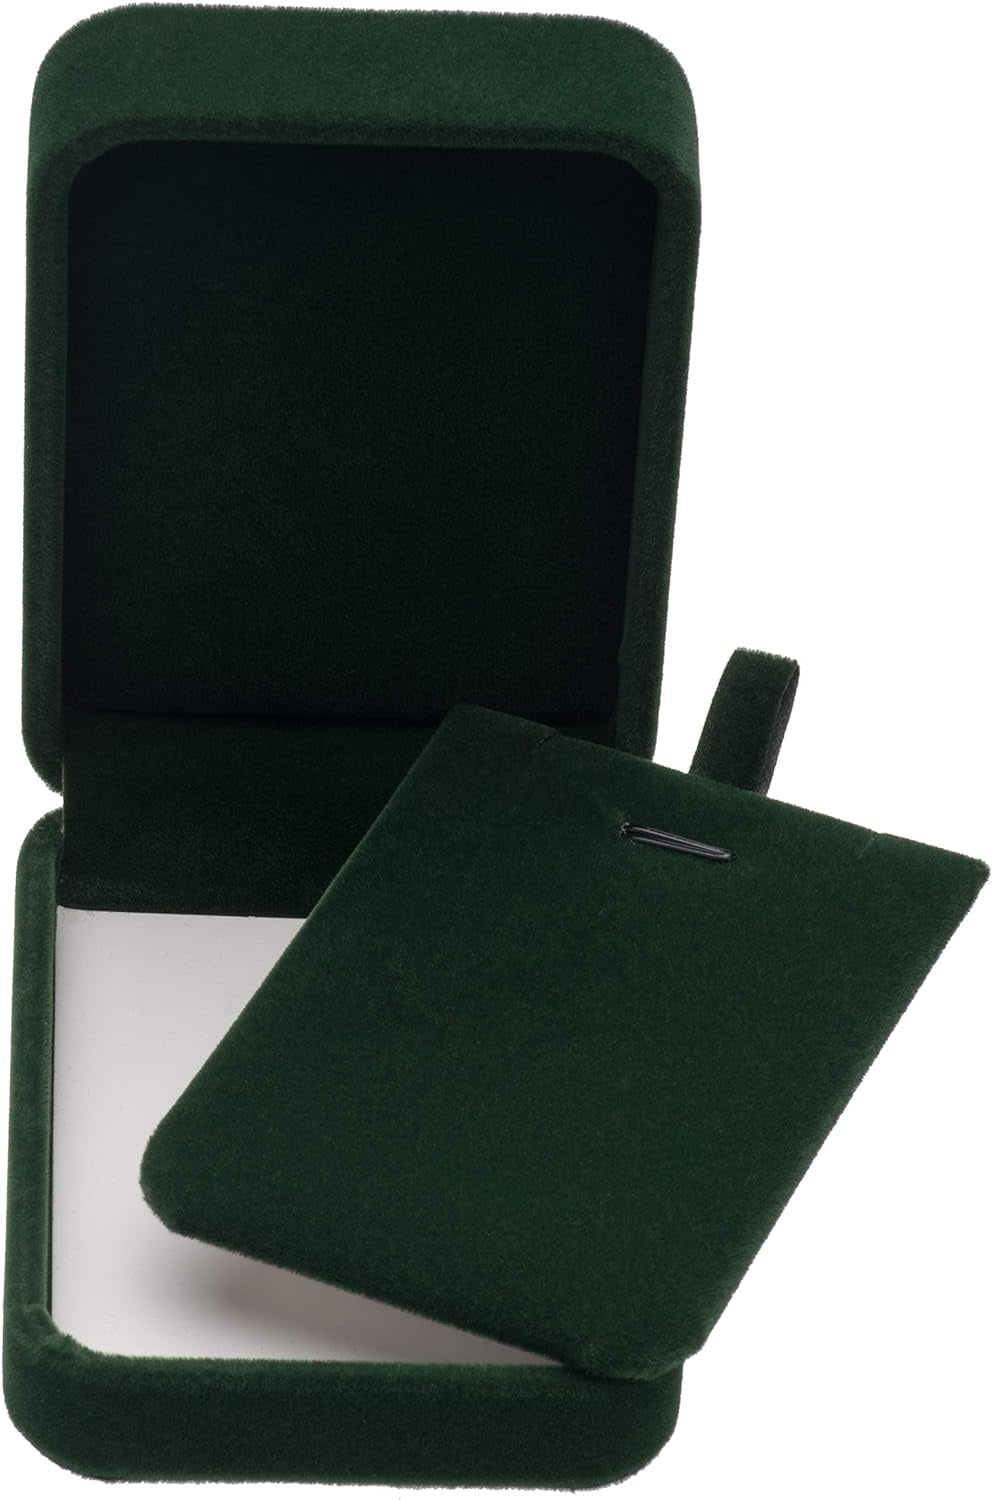 Classic Velvet Jewelry Gift Box Case for Necklace Pendant (Green)